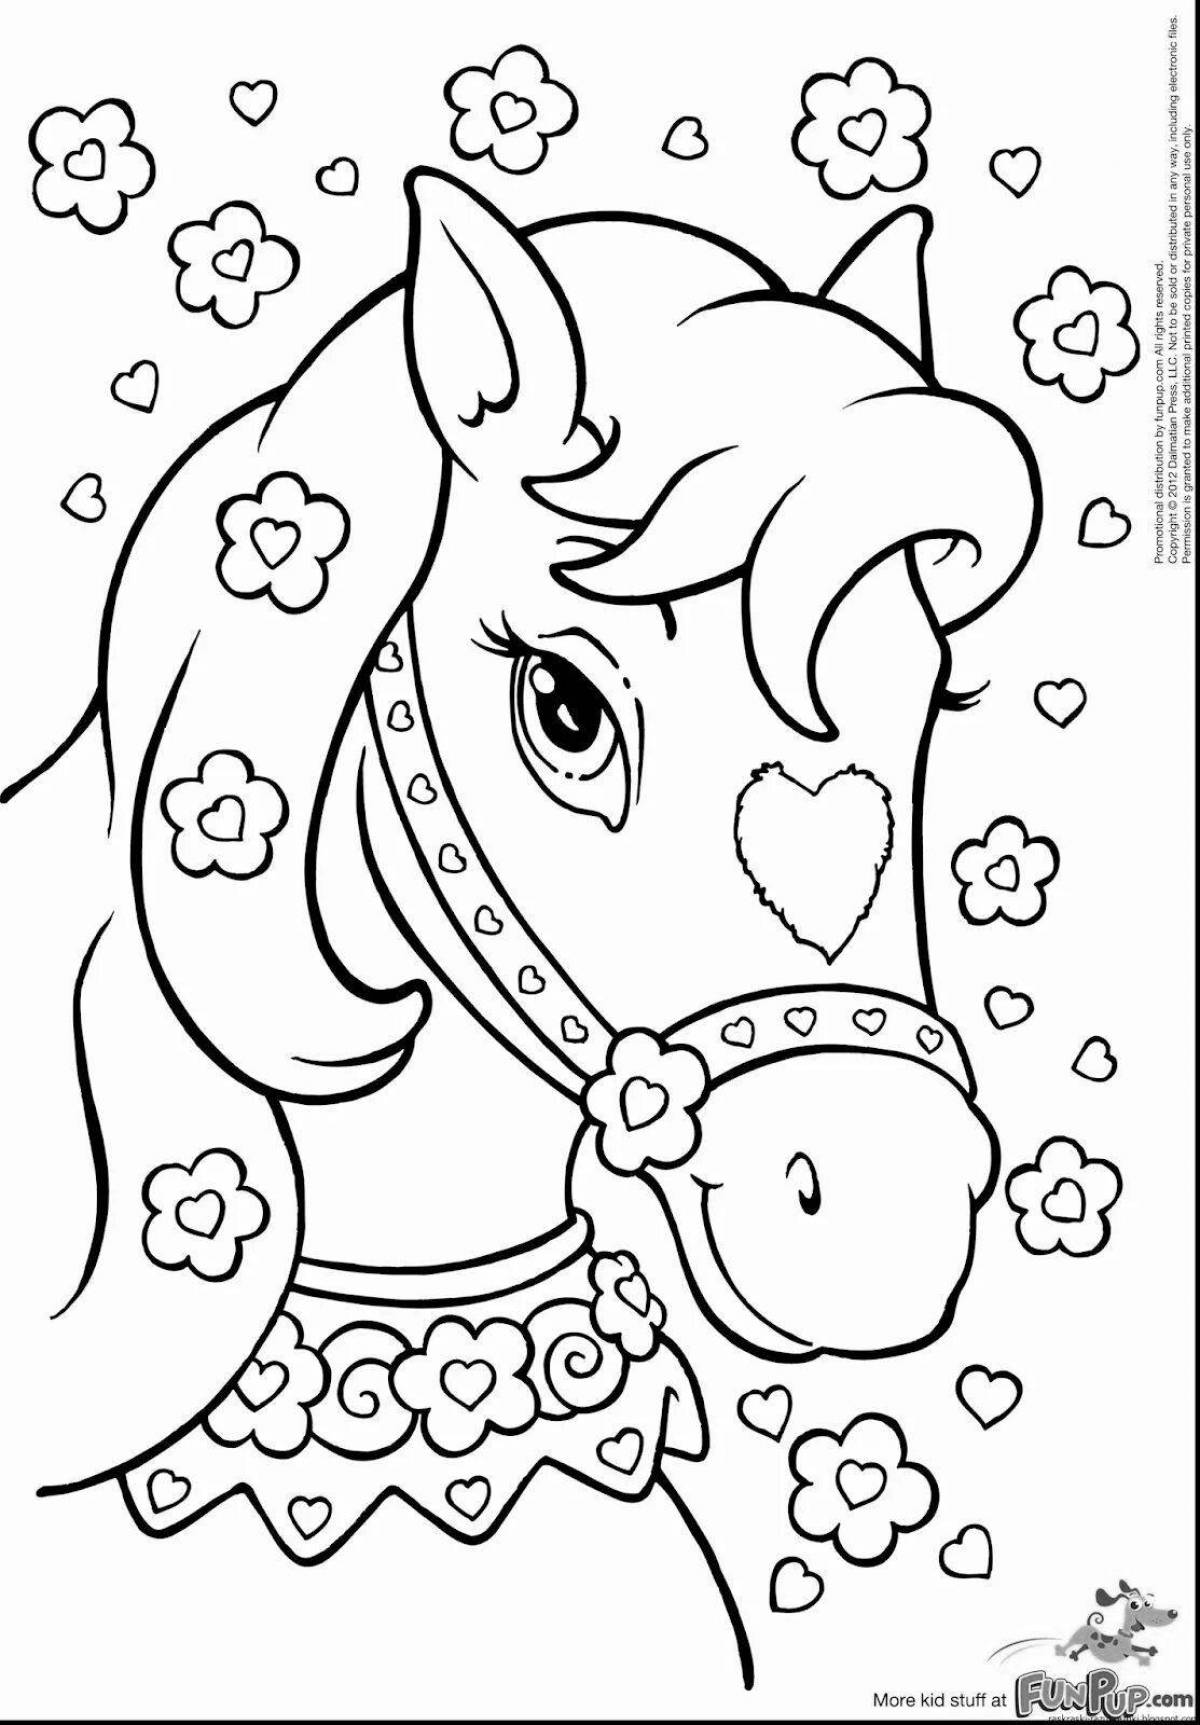 Amazing coloring picture for girls